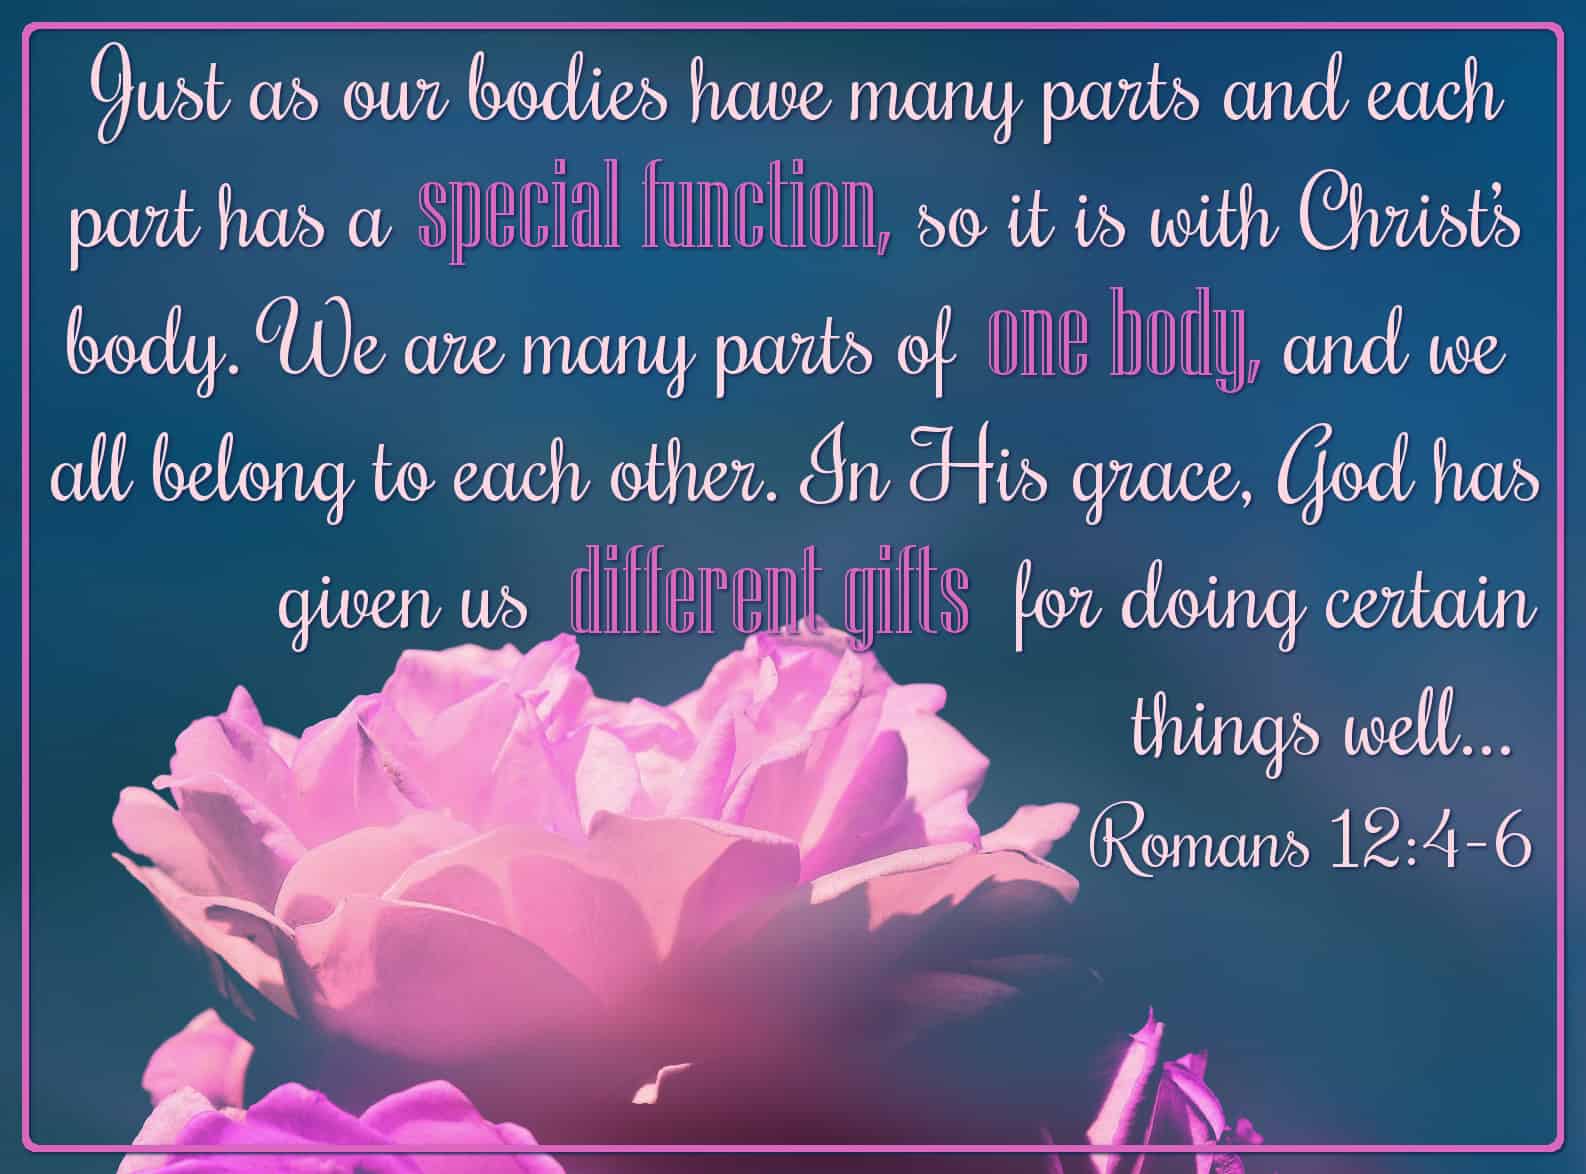 Just as our bodies have many parts and each part has a special function, so it is with Christ’s body. We are many parts of one body, and we all belong to each other. In His grace, God has given us different gifts for doing certain things well....﻿ Romans 12:4-6